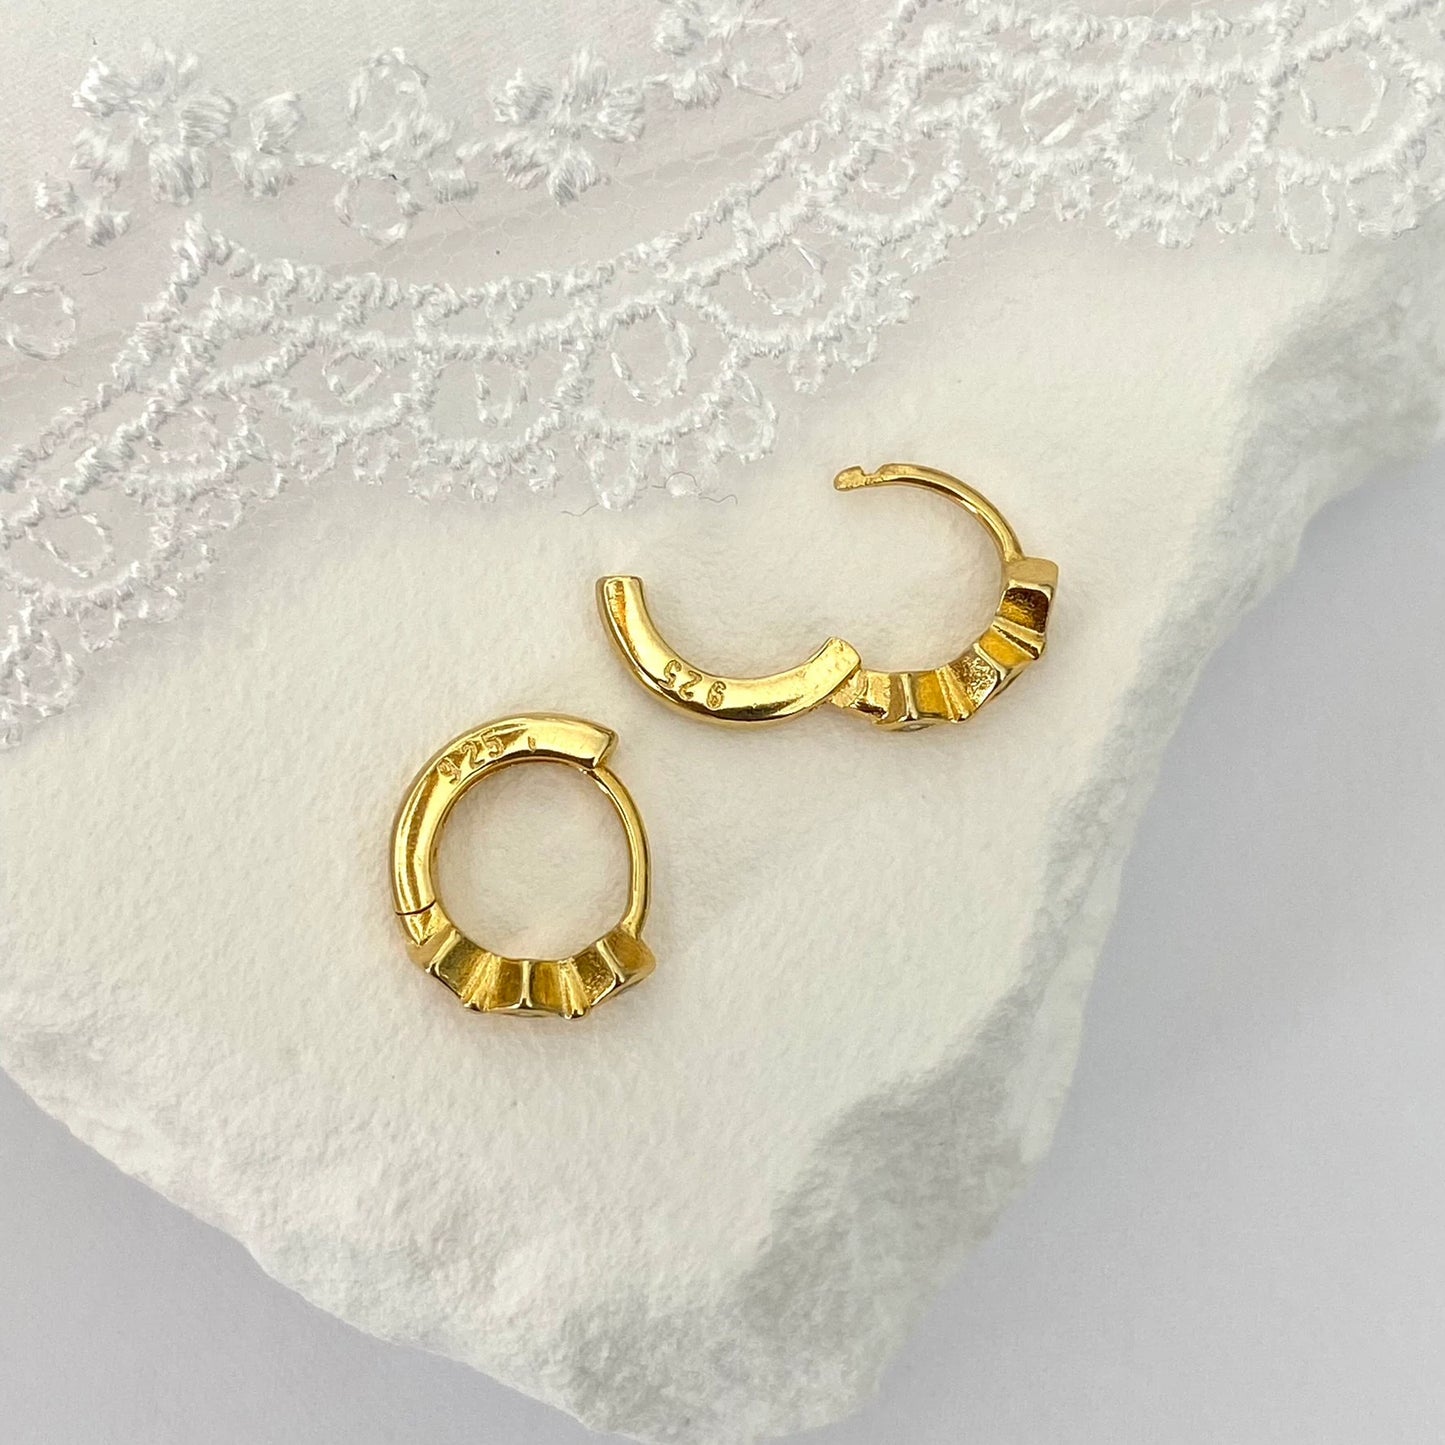 Gold Hoop Earrings with Cubic Dimond shape accents